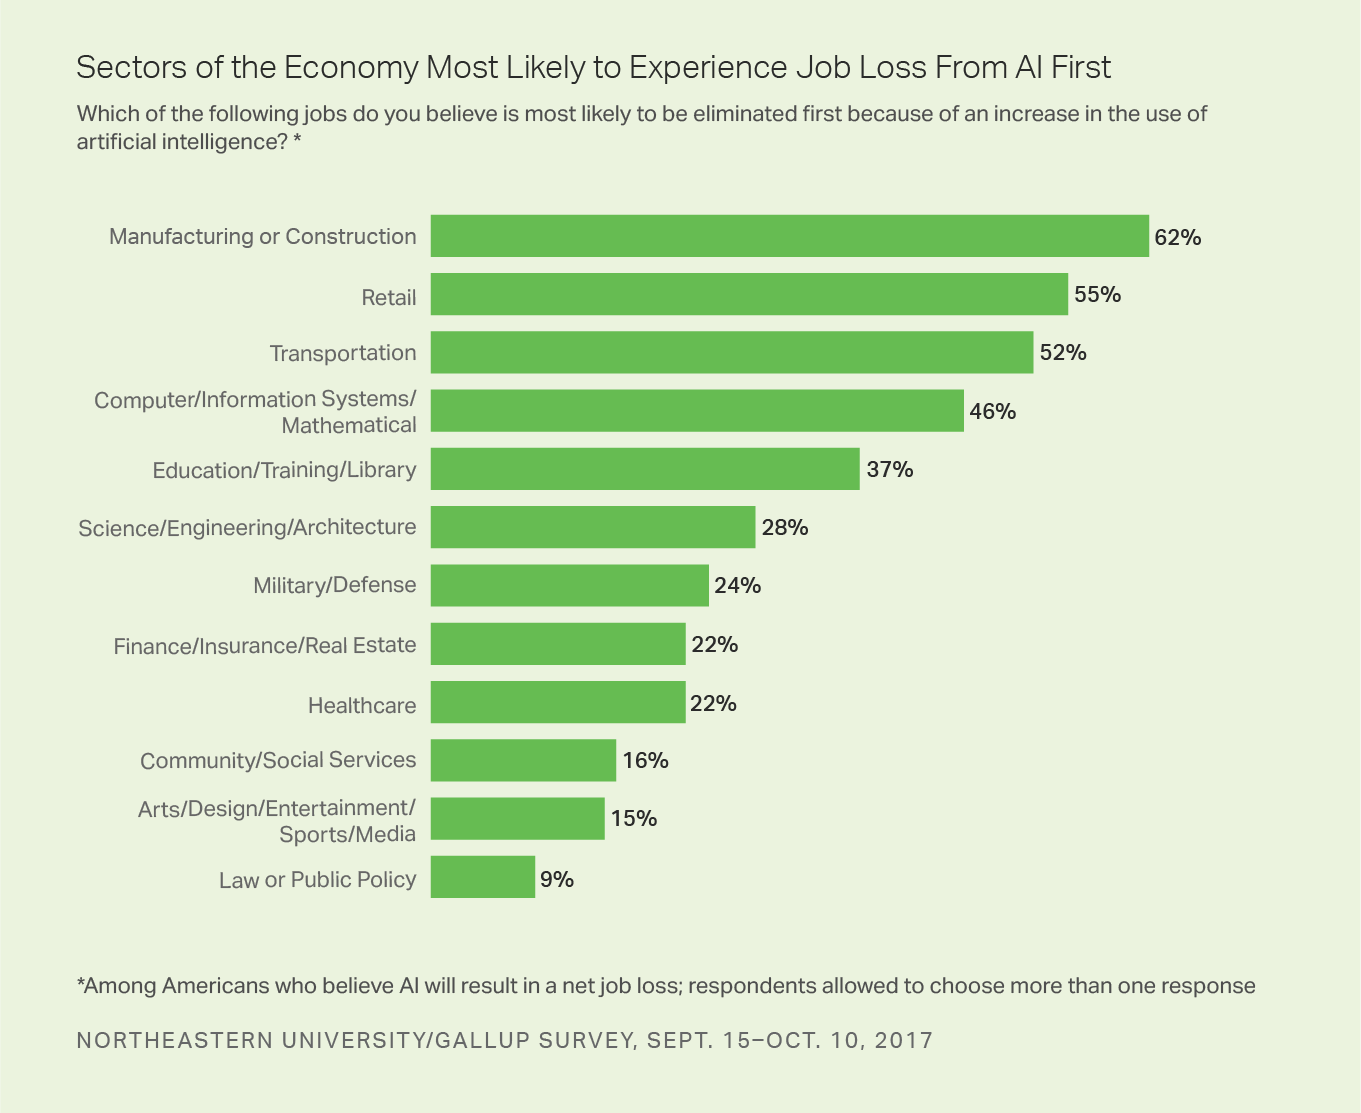 Sectors of the Economy Most Likely to Experience Job Loss From AI First